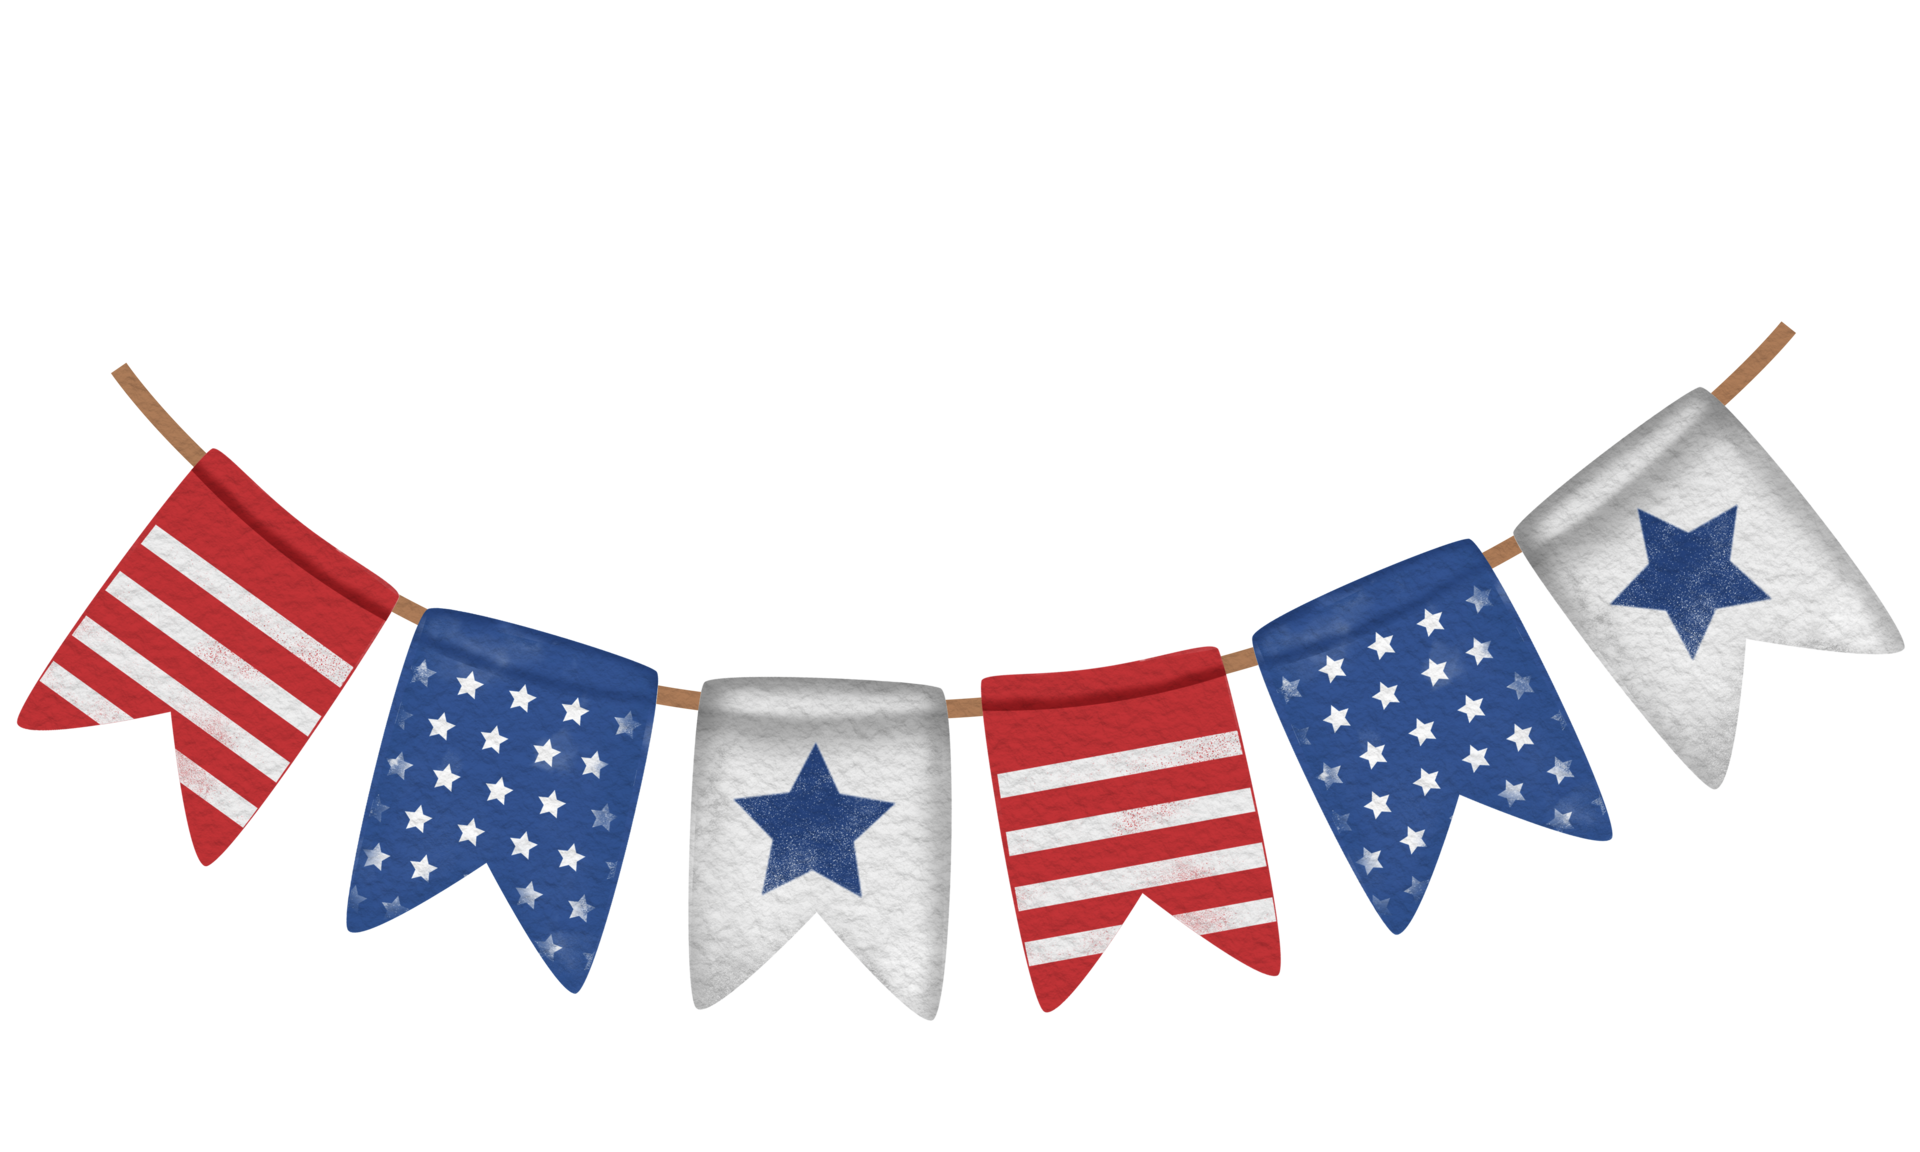 Clipart of Independence Day celebration in the colors of the American flag.